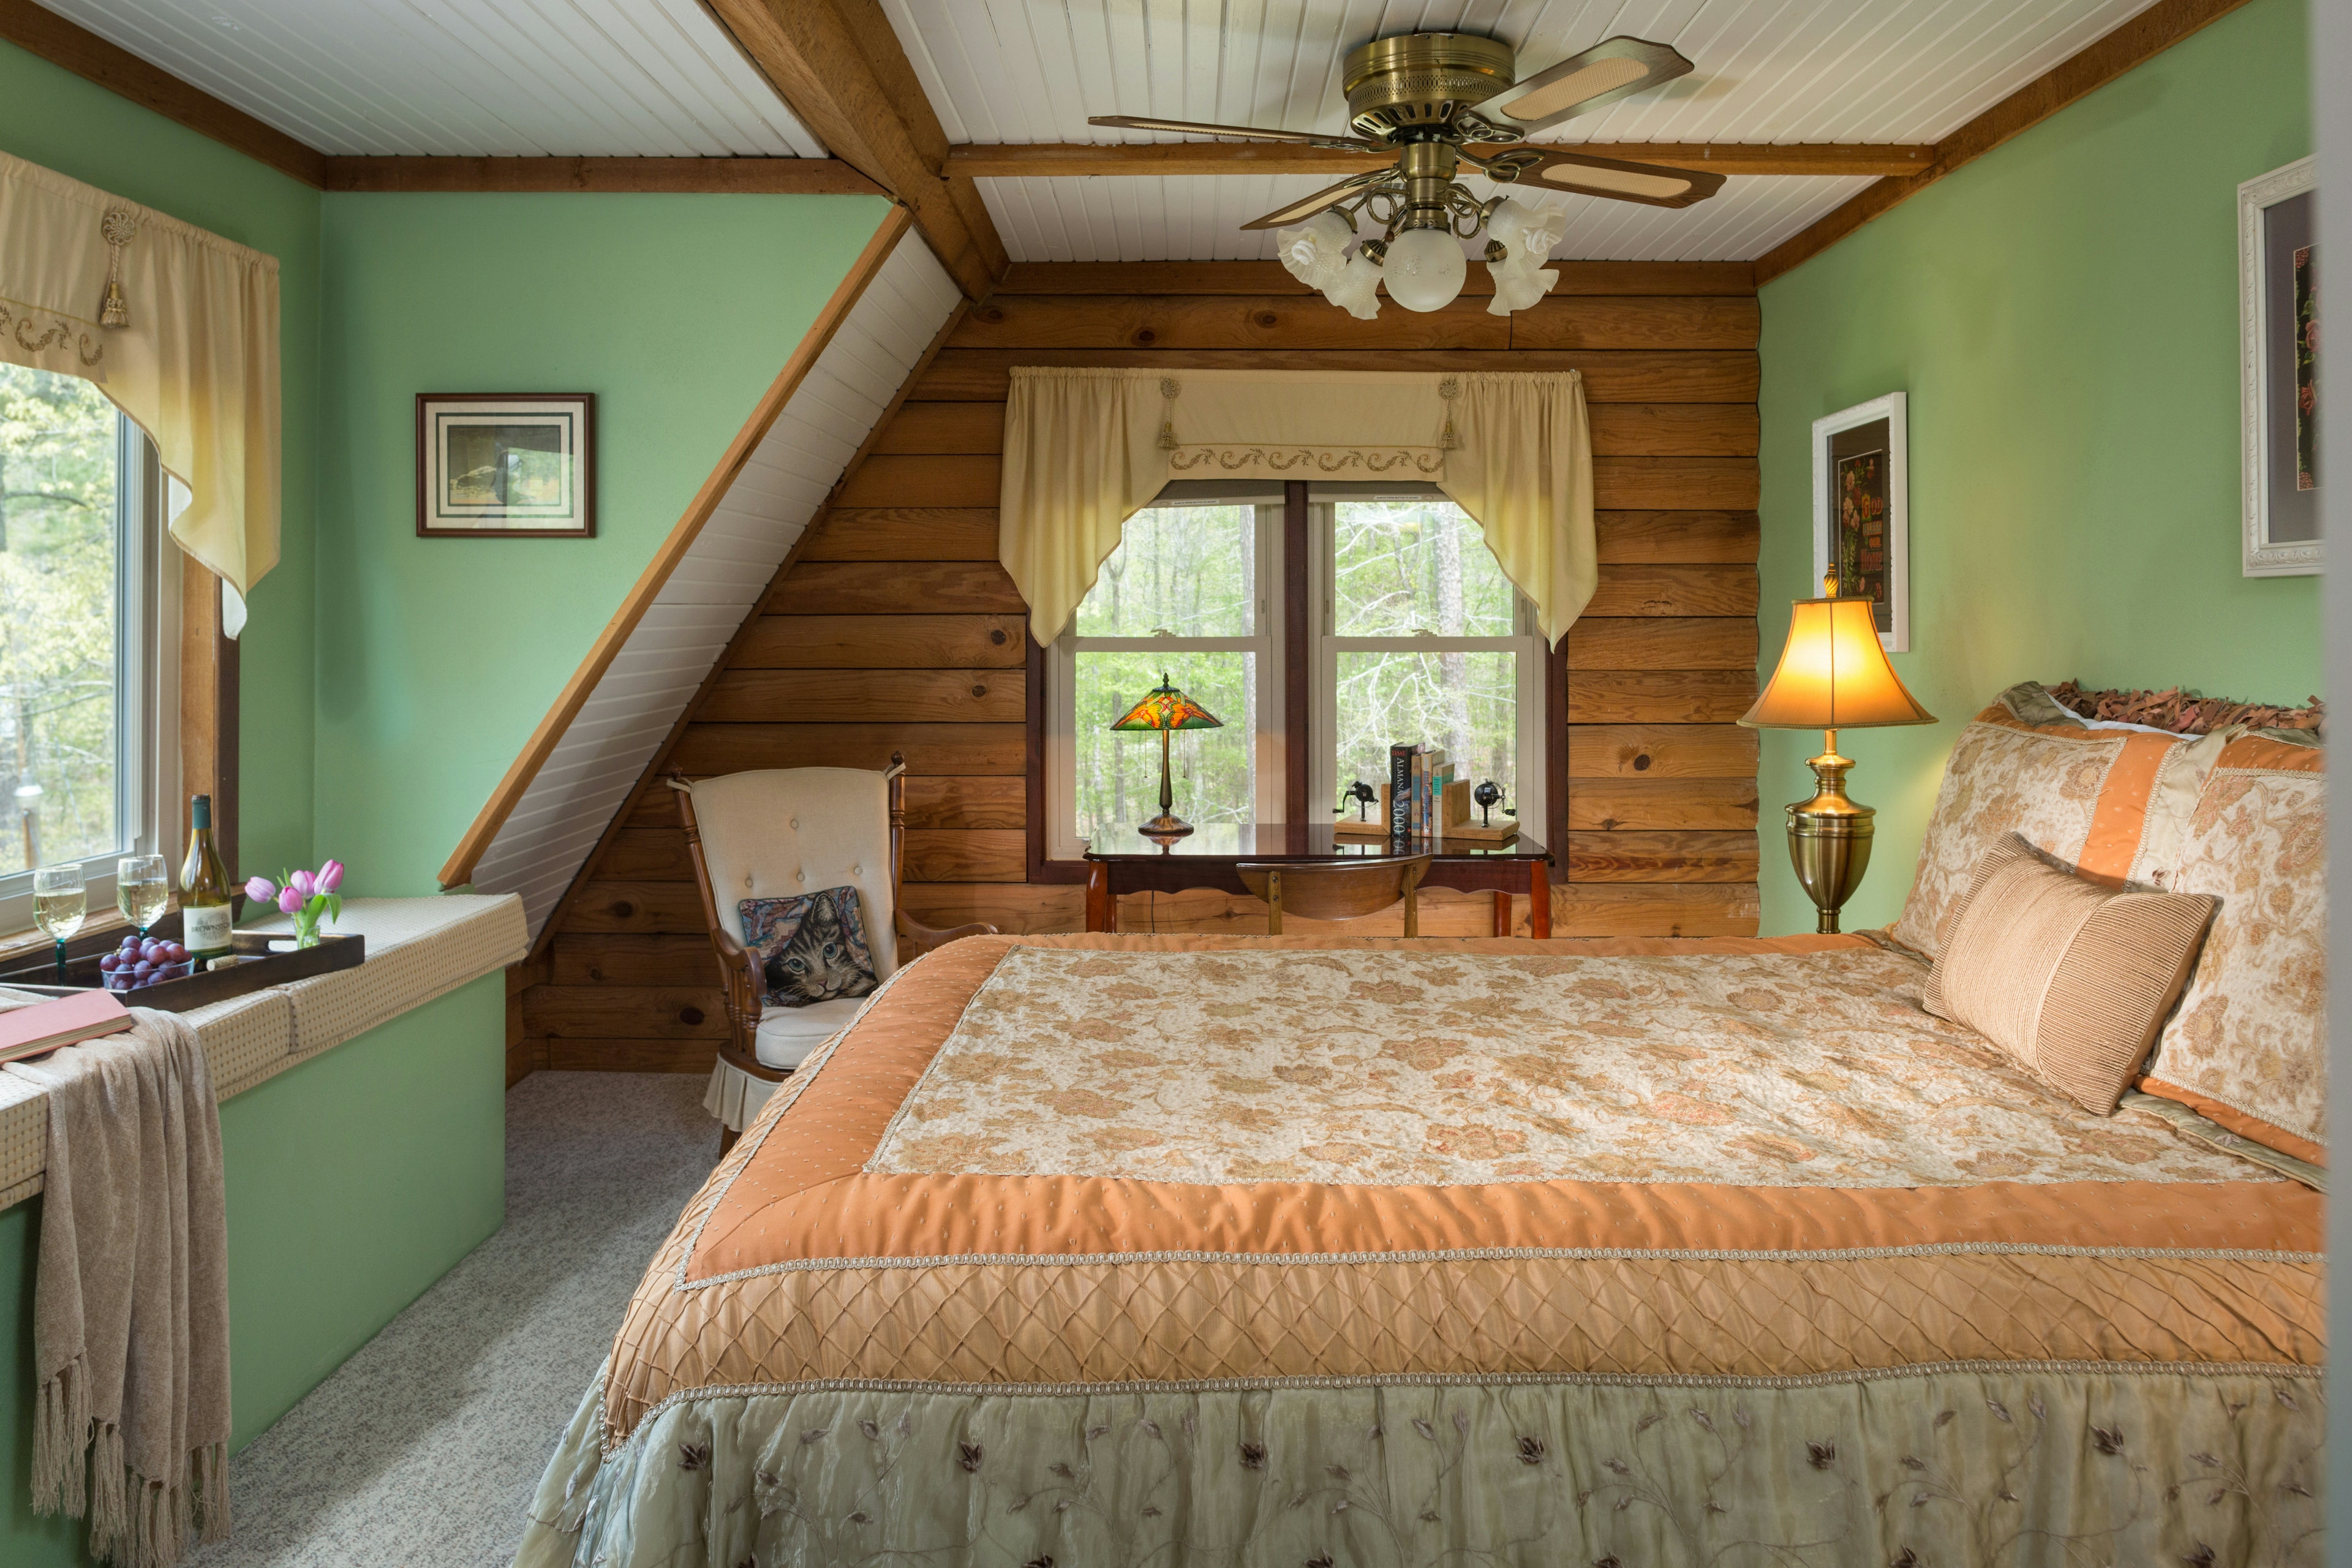 A bedroom with two green walls and one log wall.  A queen-sized bed is in the middle, with a quilt and decorative pillows. on the left is a window seat with cushions.  On top of the cushions is a throw blanket and a tray with a wine bottle and wine glasses.  In the background is a padded rocking chair, and a desk with a table lamp and books on it. The desk is sitting in front of a window that overlooks trees outside.  There is carpet on the floor, and a ceiling fan on the ceiling.